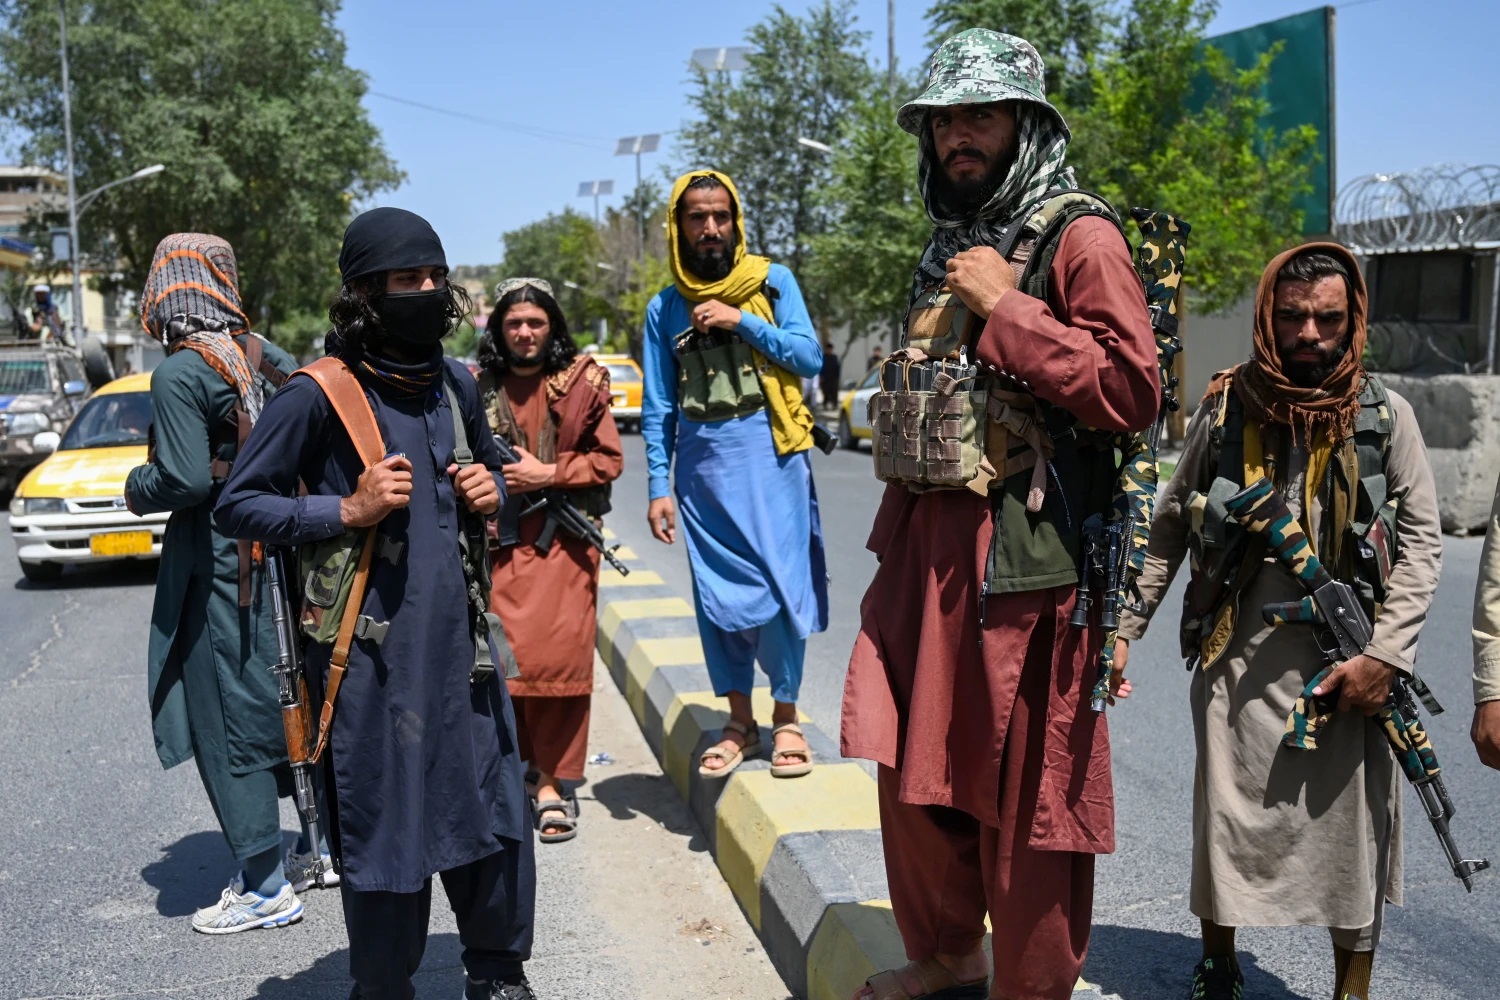 Taliban official: 20 men lashed in public in Afghanistan